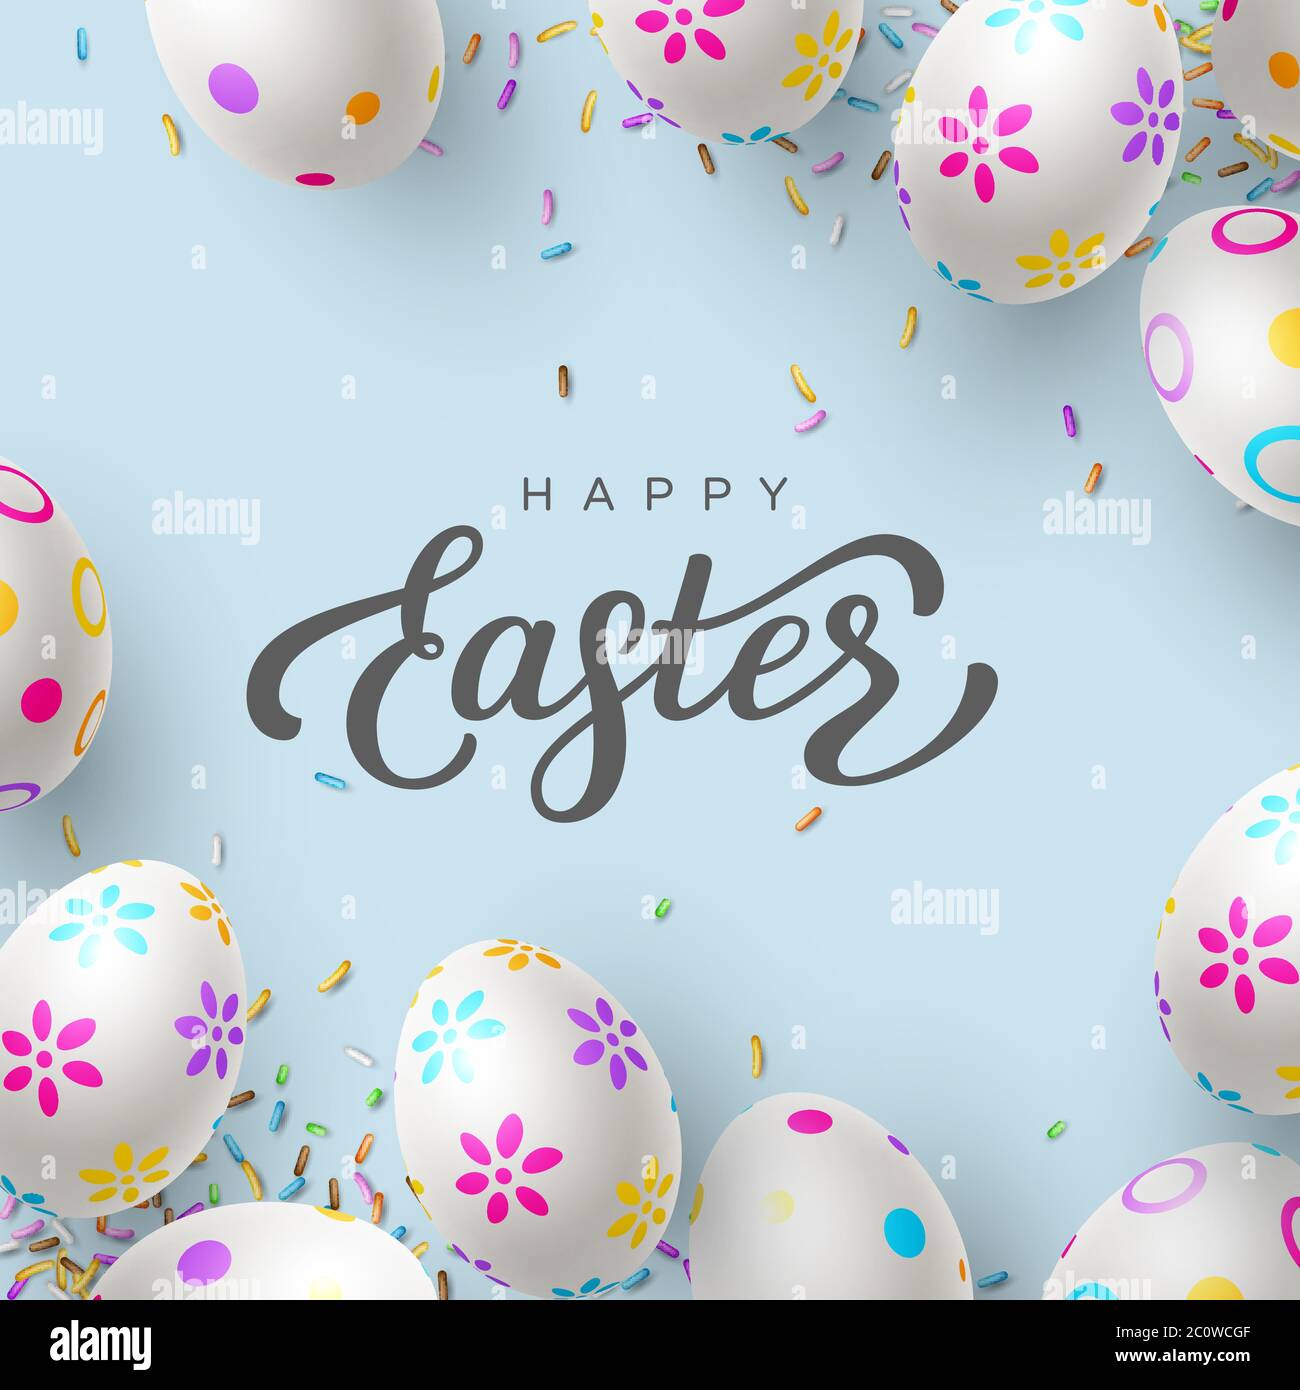 Happy Easter background with painted eggs. Stock Vector